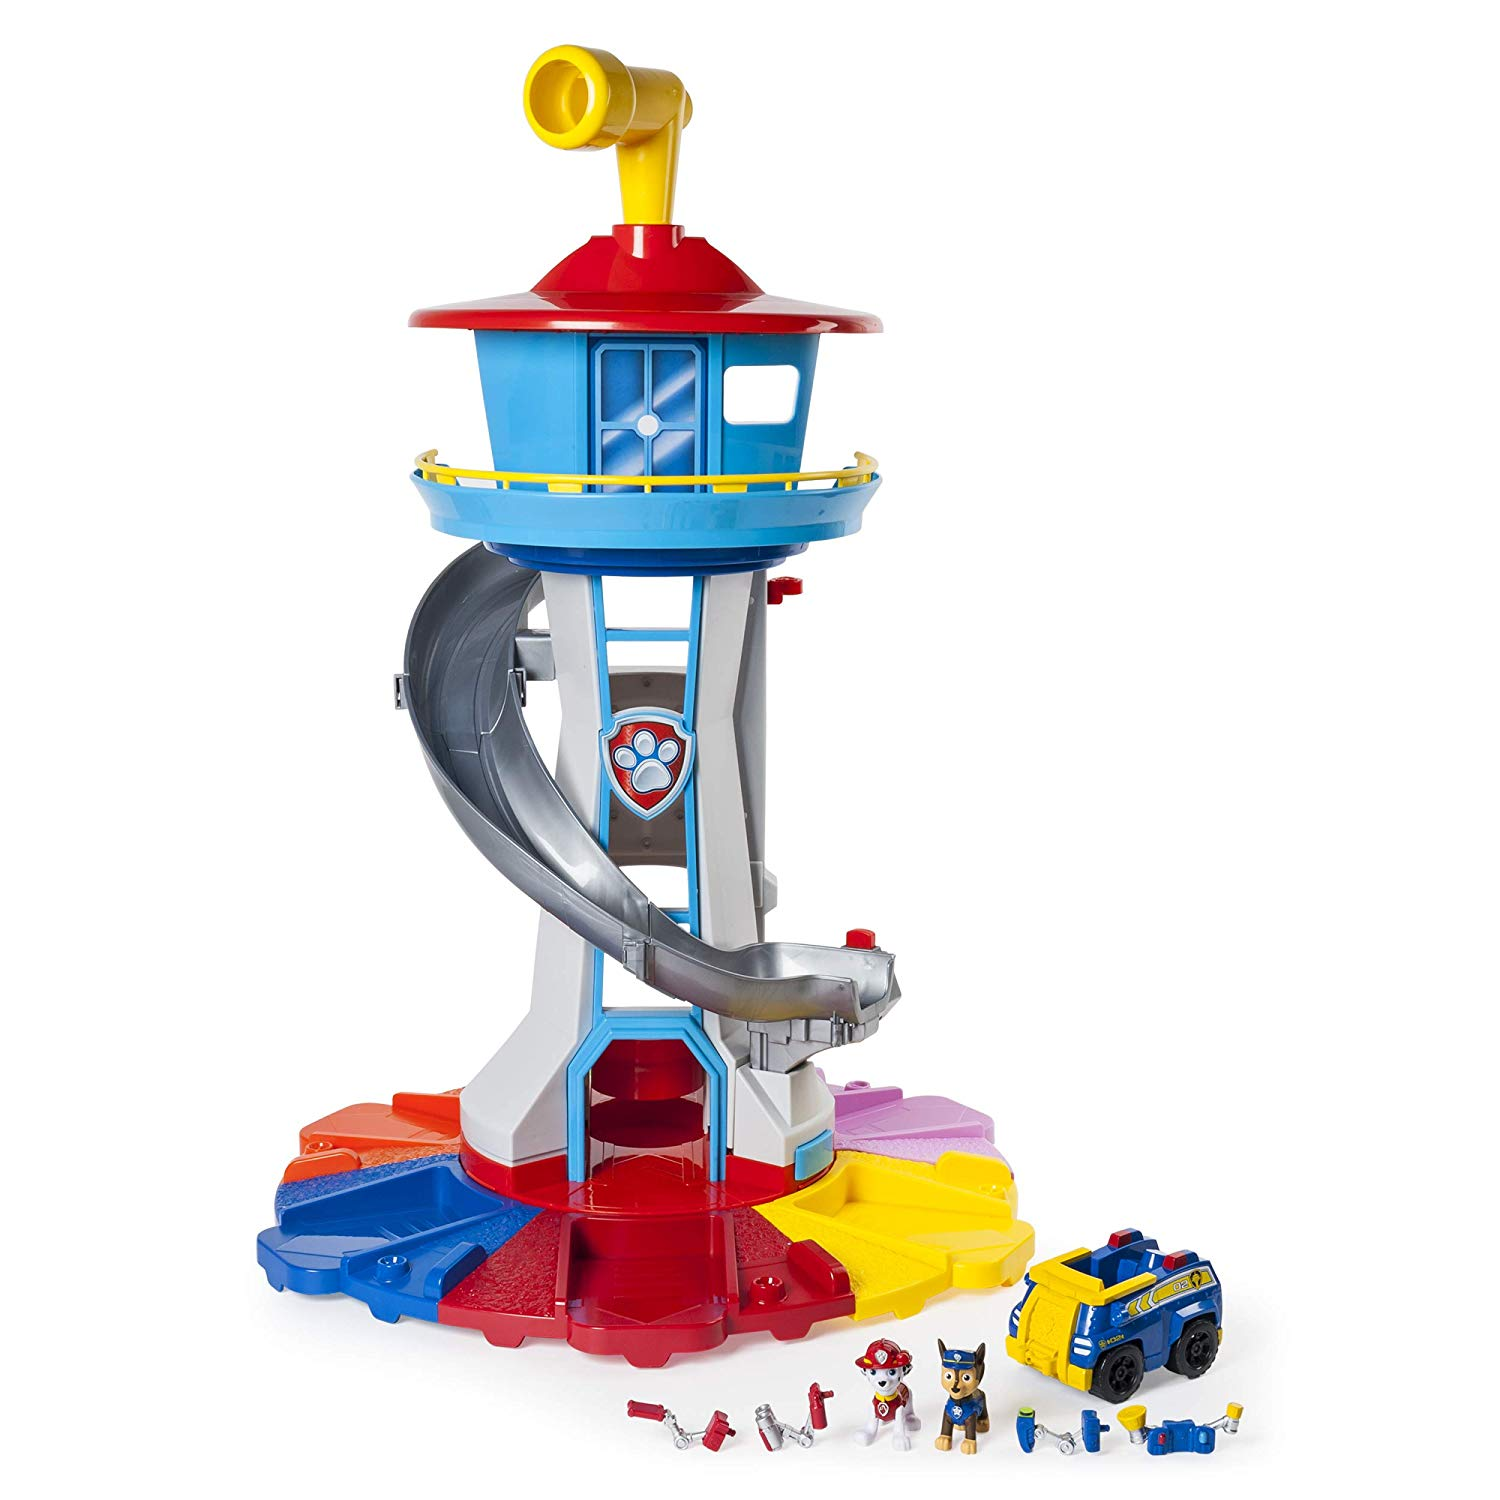 Paw Patrol My Size Lookout Tower for Only $75.65 Shipped! (Reg. $100)